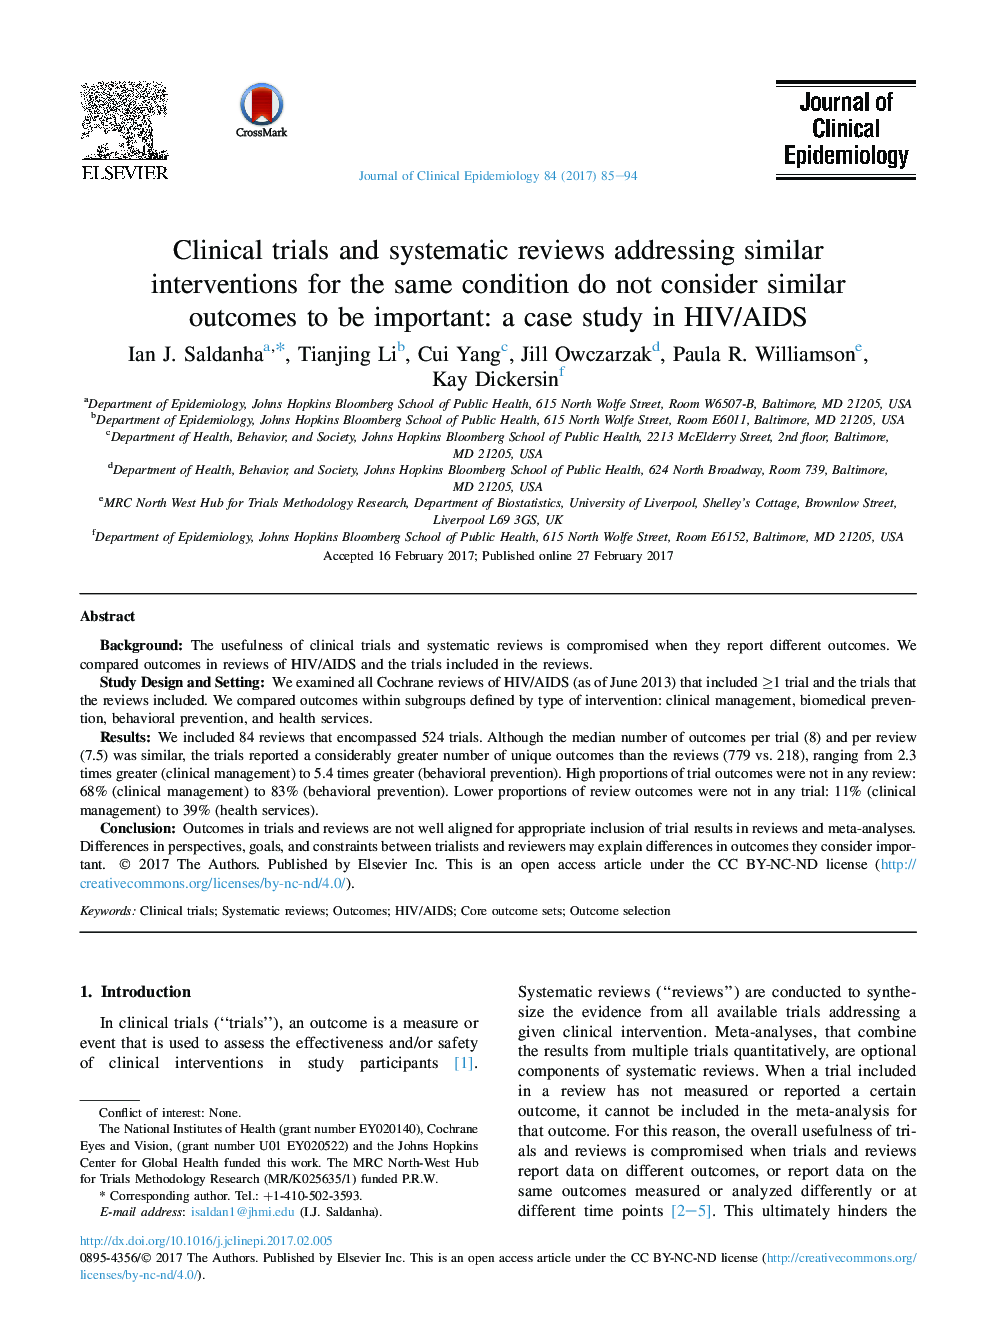 Clinical trials and systematic reviews addressing similar interventions for the same condition do not consider similar outcomes to be important: a case study in HIV/AIDS